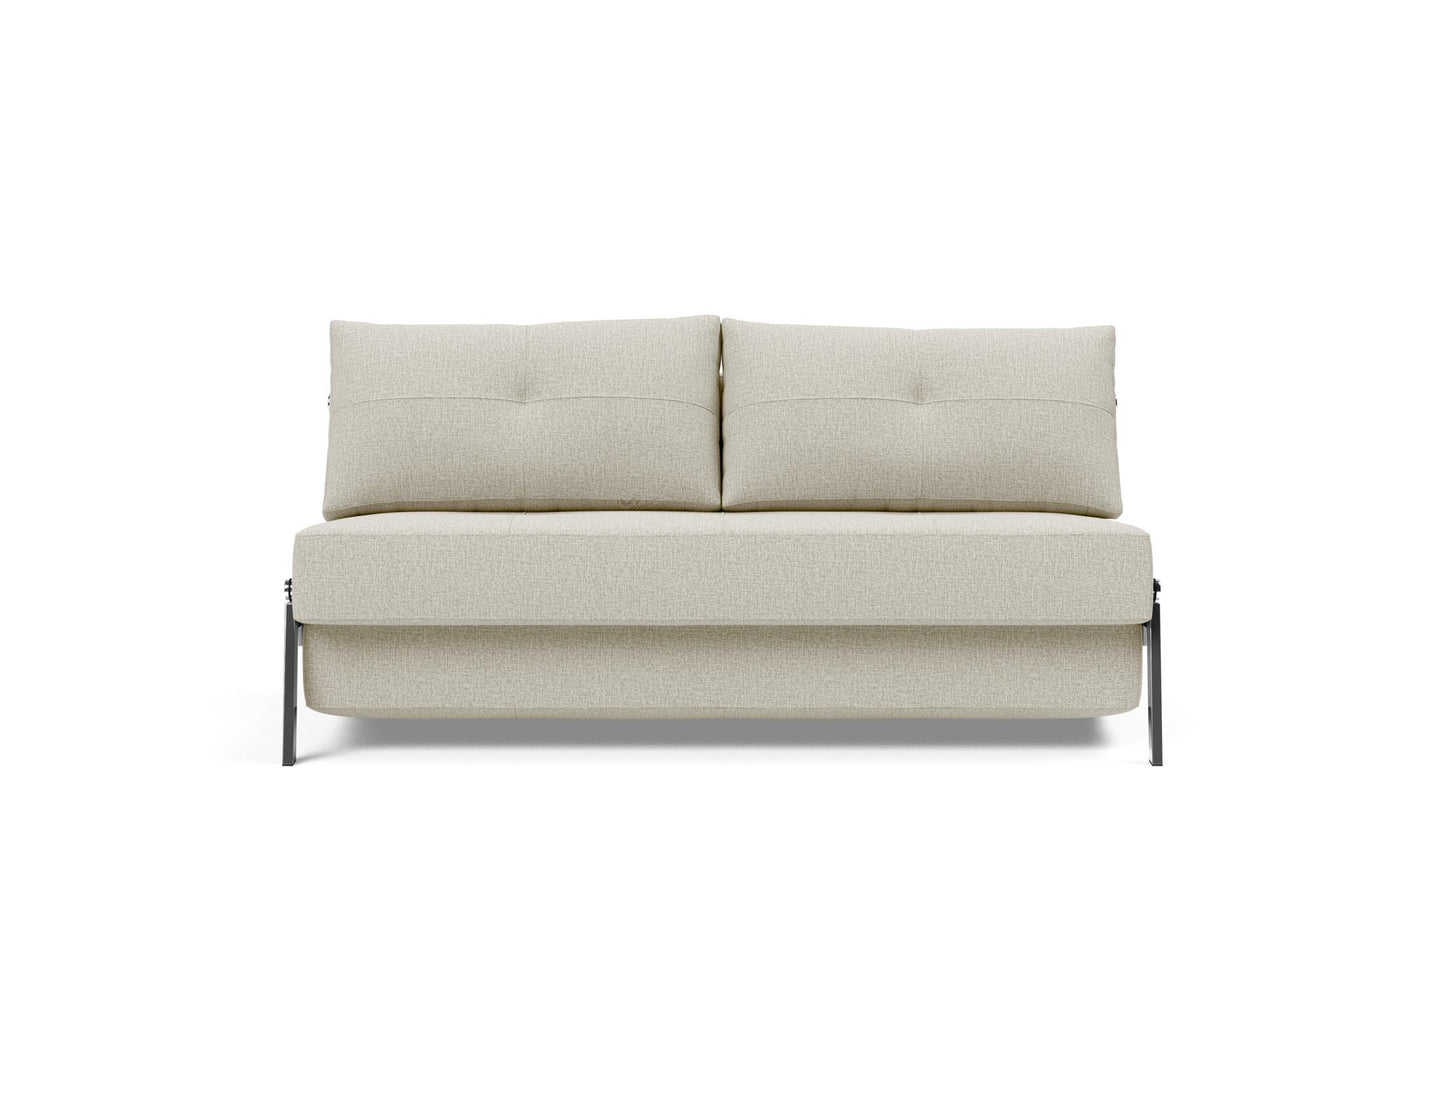 Cubed Sofa - Queen size, with Chrome Legs